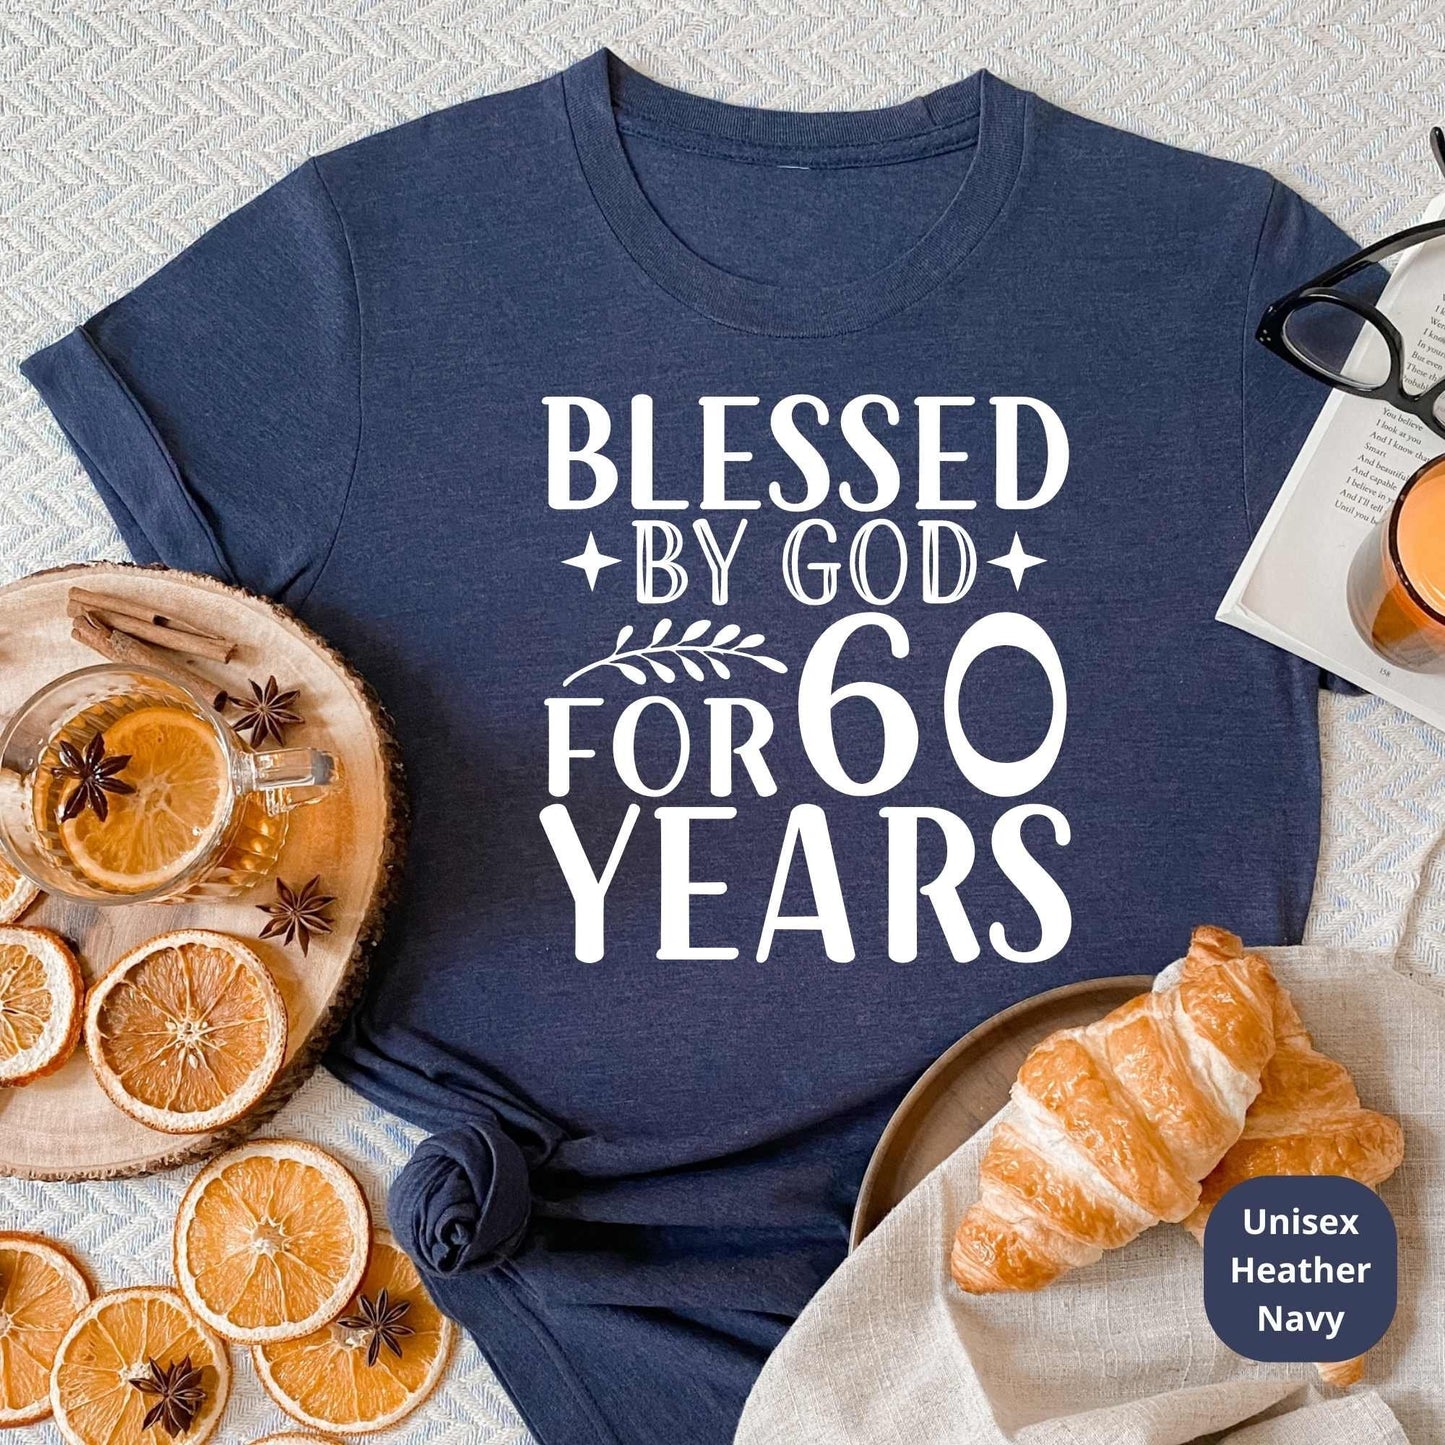 60th Birthday Shirt, 60th Birthday Gifts, Bless by God 60 Years